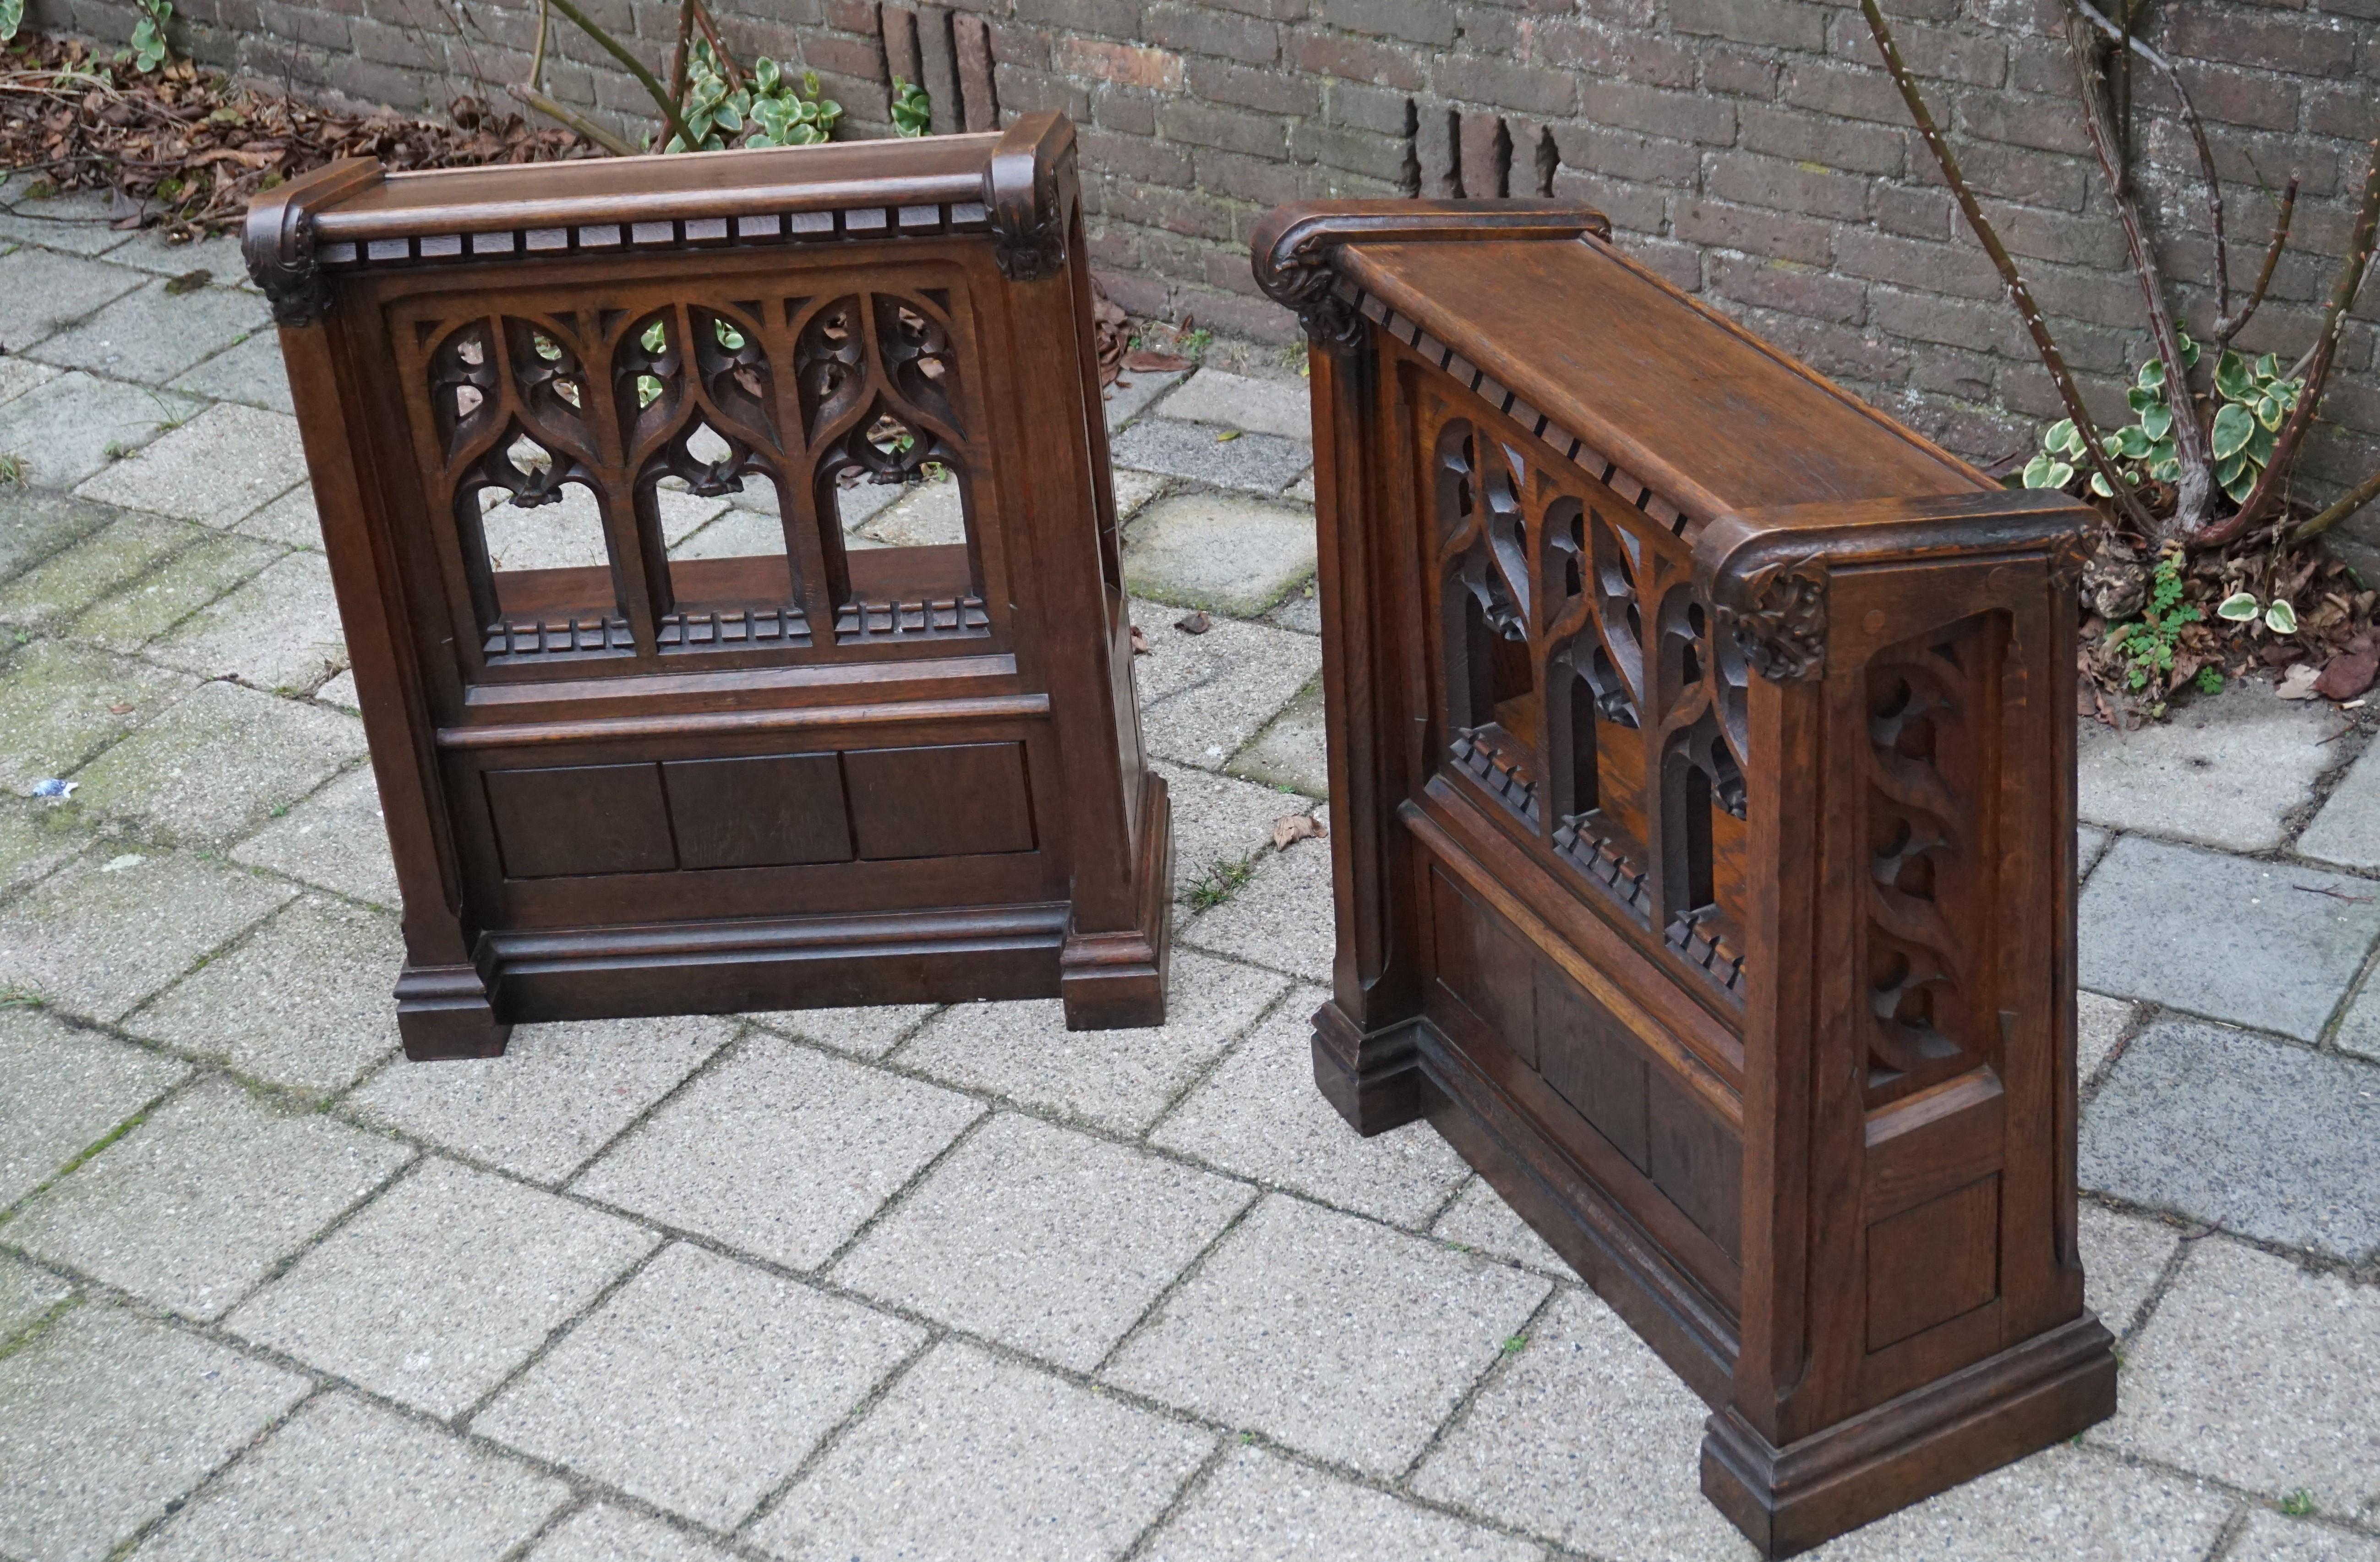 Top quality crafted and incredibly durable pair of Gothic church lecterns.

These practical size lecterns are remarkably well crafted and their design and patina are to die for. The perfectly hand carved Gothic style elements in these architectural